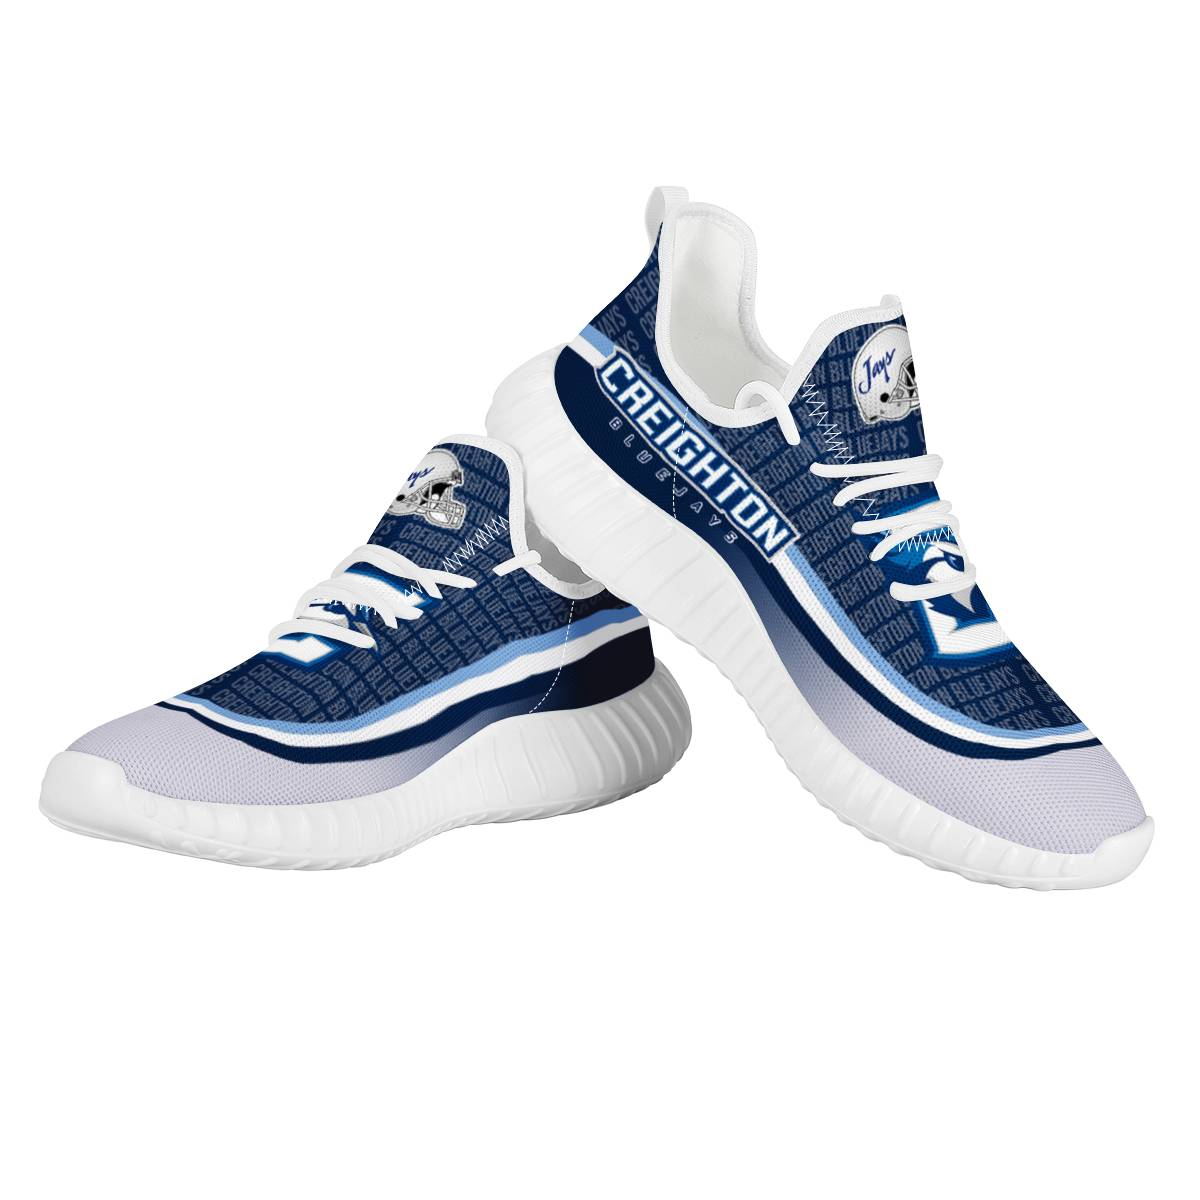 Women's MLB Tampa Bay Rays Mesh Knit Sneakers/Shoes 004